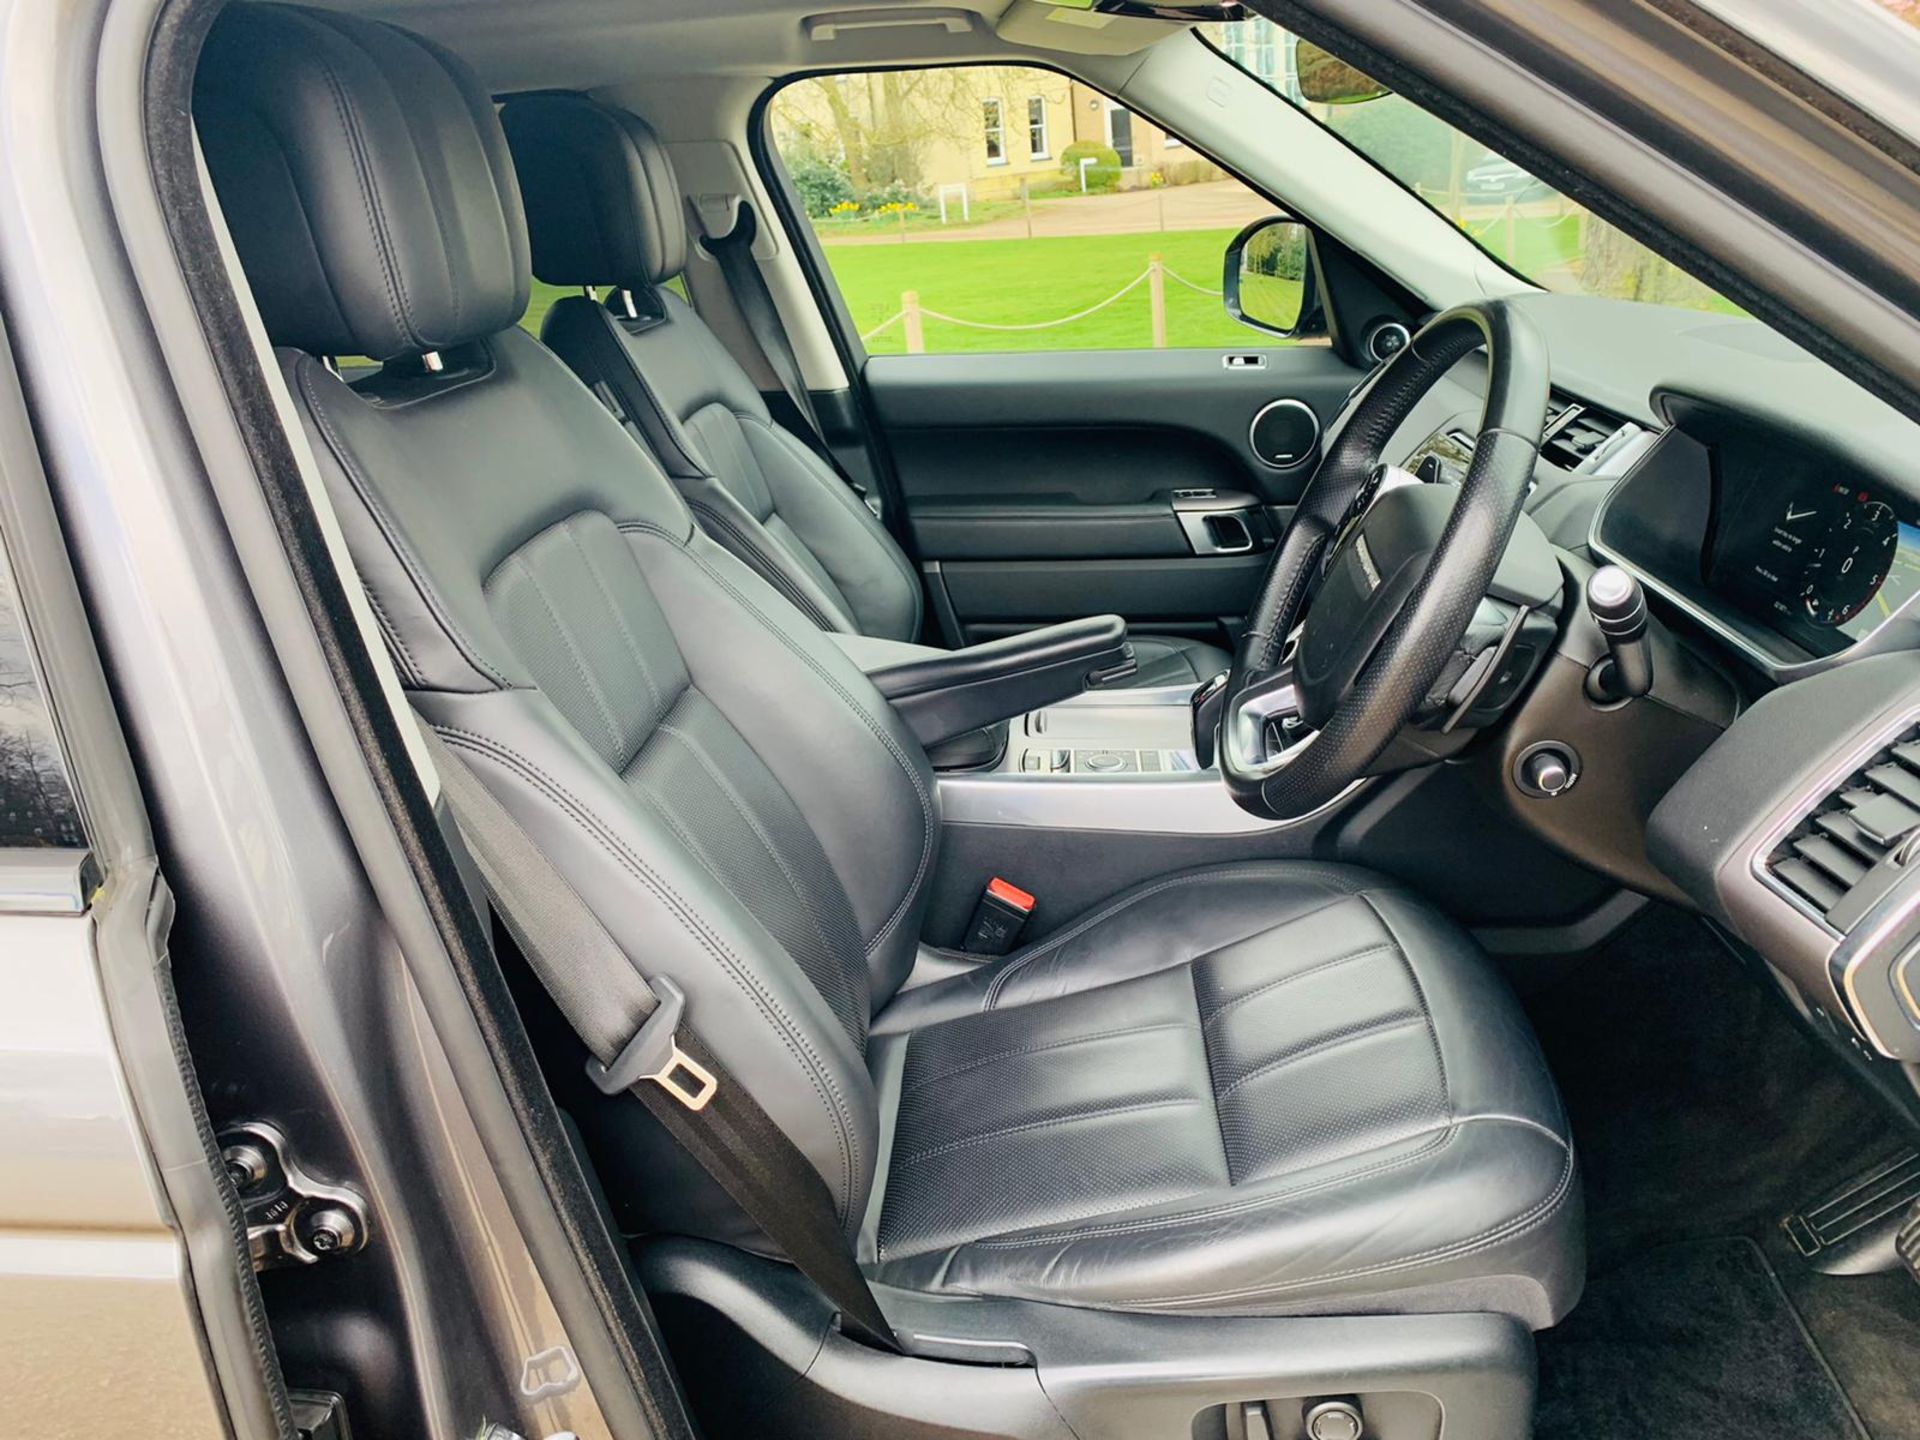 Range Rover Sport 3.0 SDV6 HSE Auto - 2019 - 1 Keeper From New - Virtual Cockpit - - Image 31 of 42